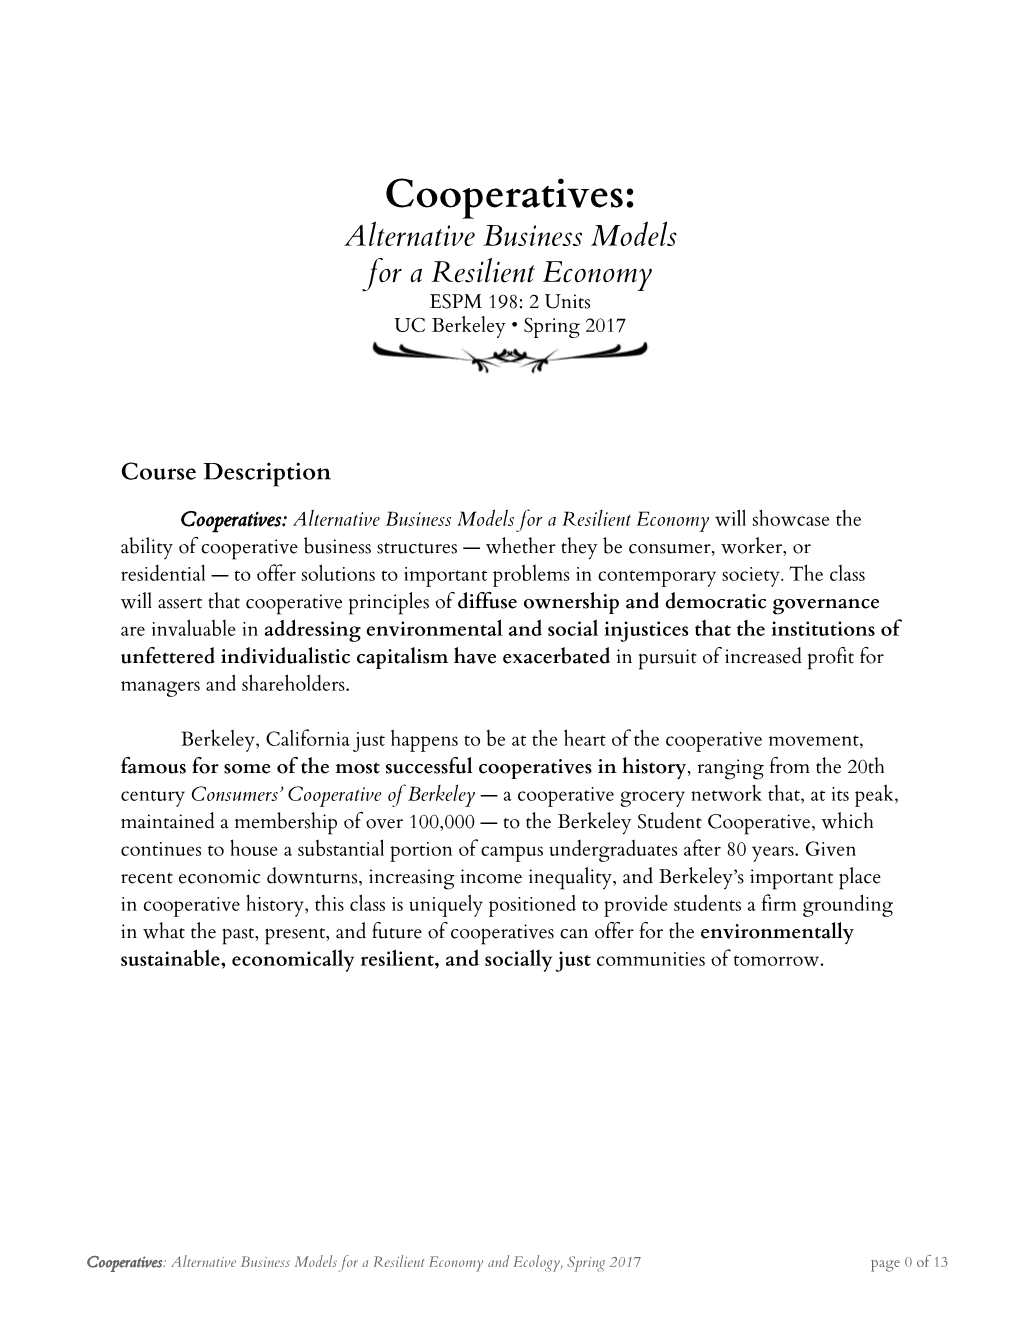 Cooperatives: Alternative Business Models for a Resilient Economy ESPM 198: 2 Units UC Berkeley • Spring 2017